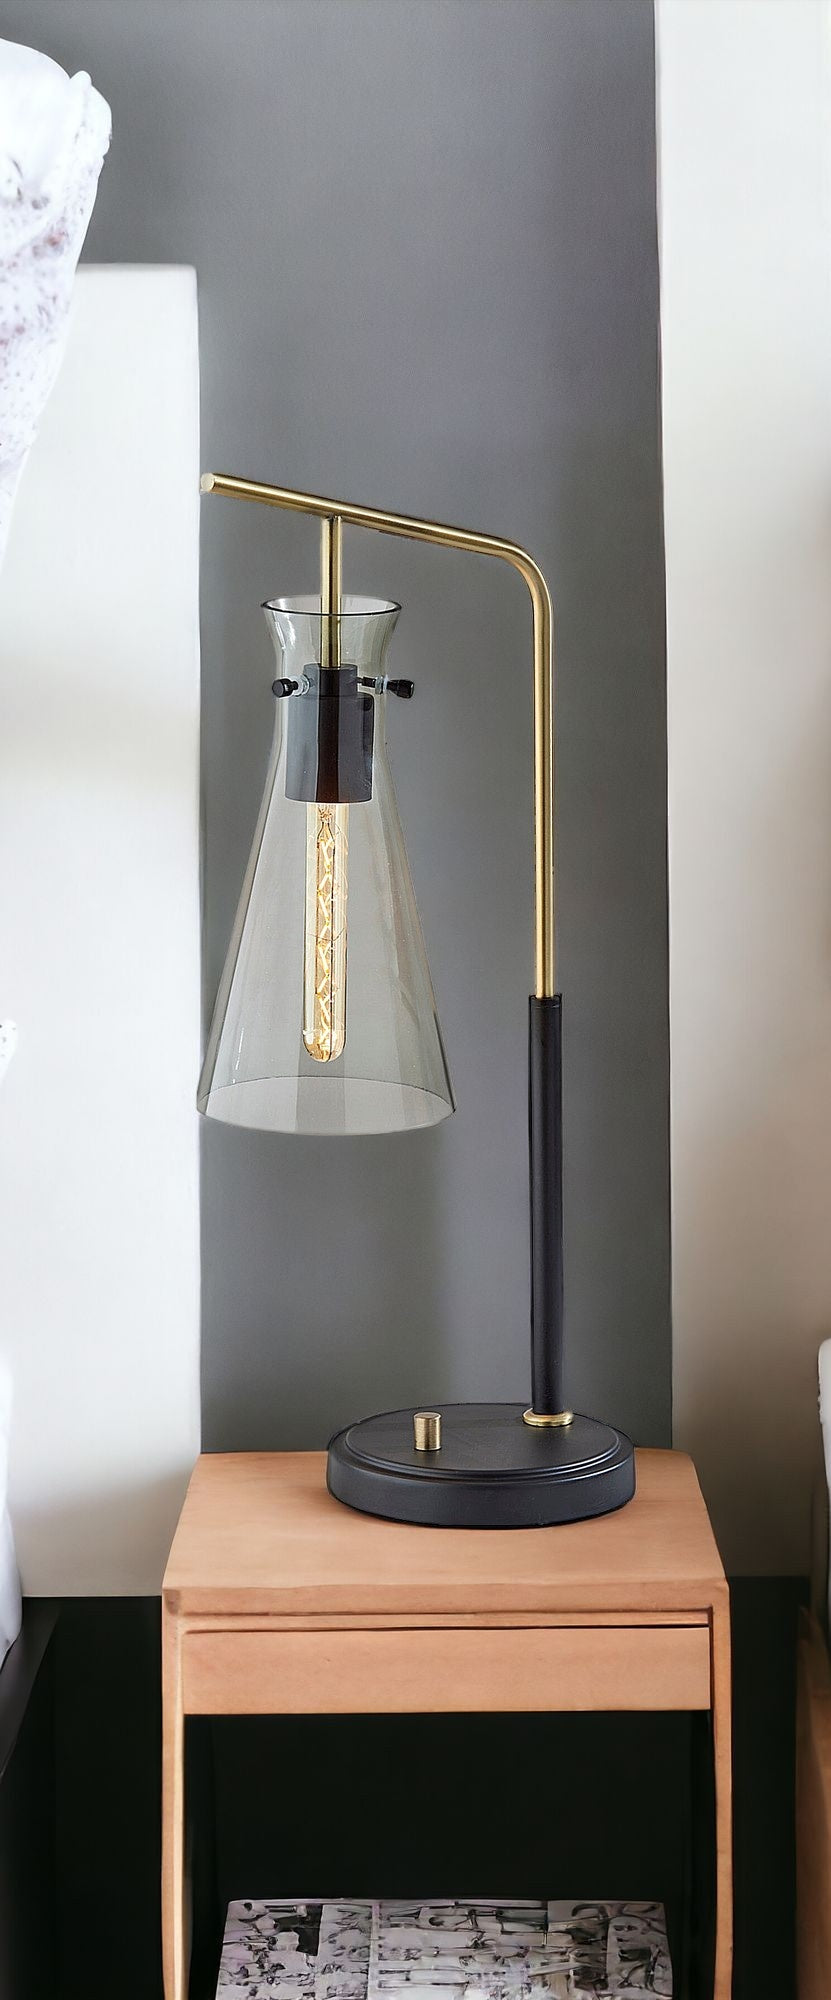 24" Black and Gold Metal Cylinder Desk Table Lamp With Gray Cone Shade